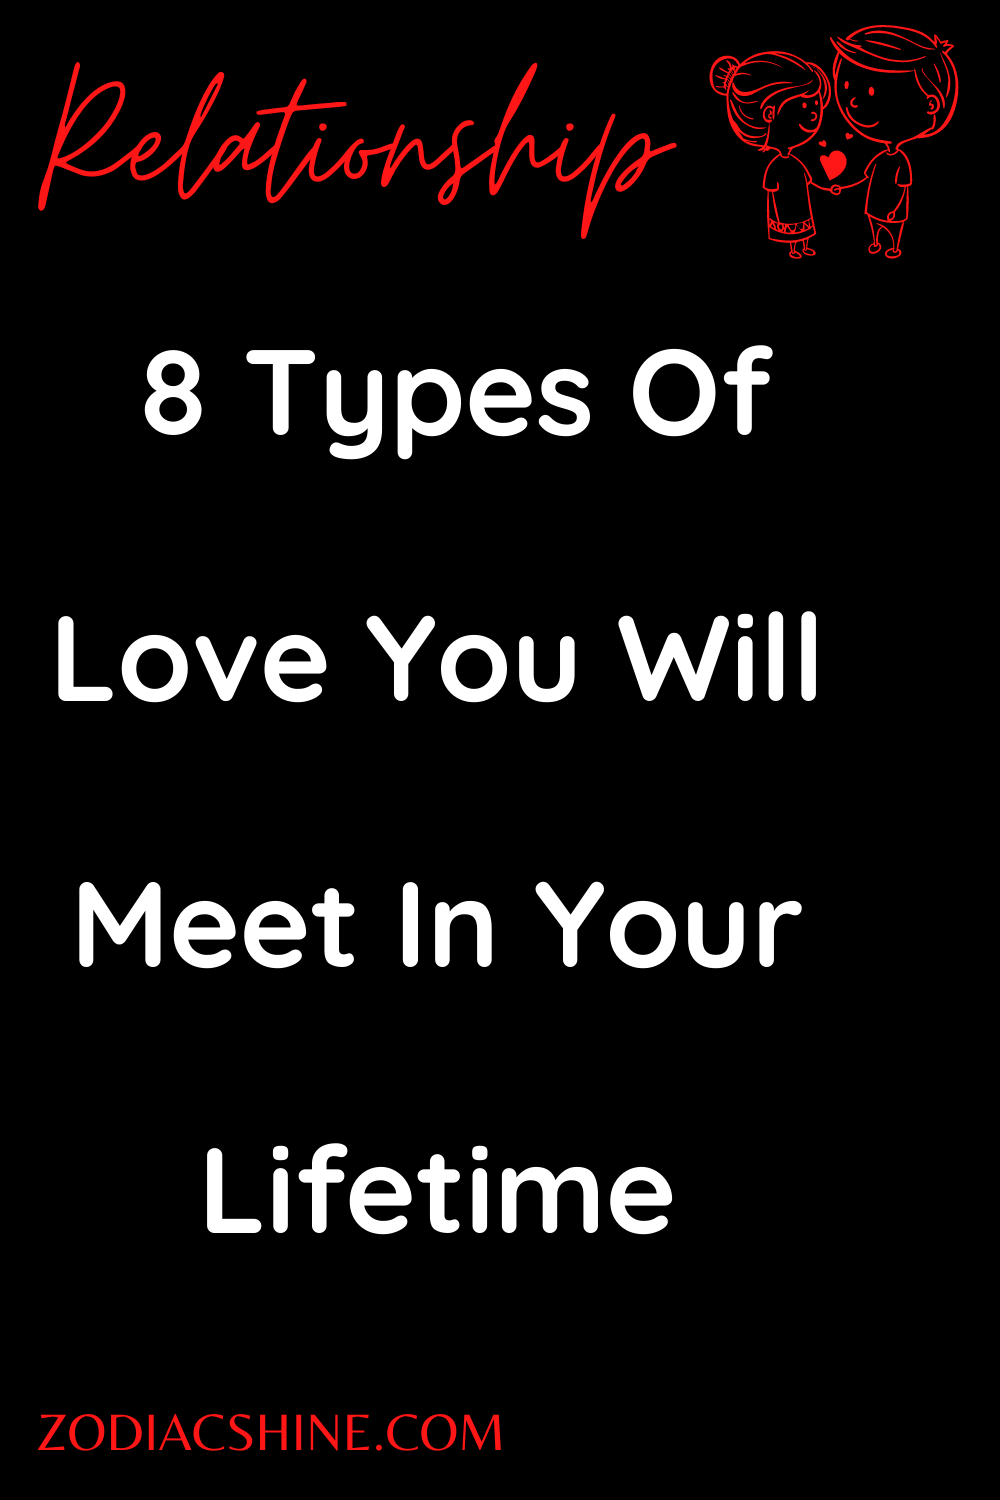  8 Types Of Love You Will Meet In Your Lifetime